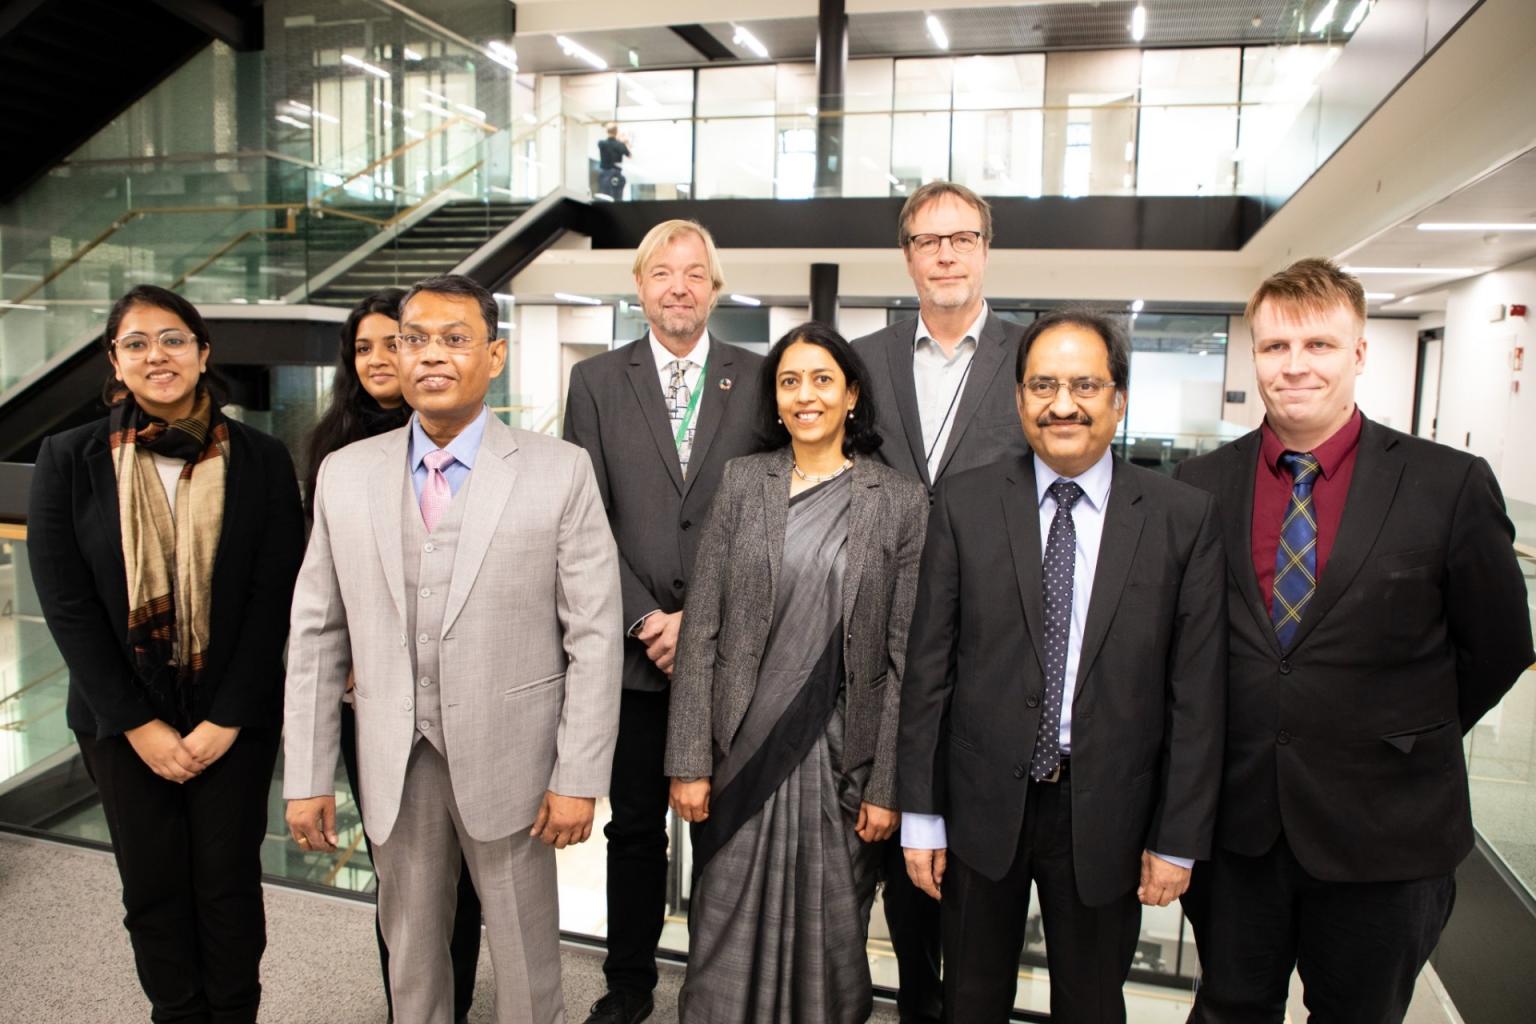 Ms. Akshaya and Ms. Smrithi were part of the Indian delegation in the Helsinki meeting